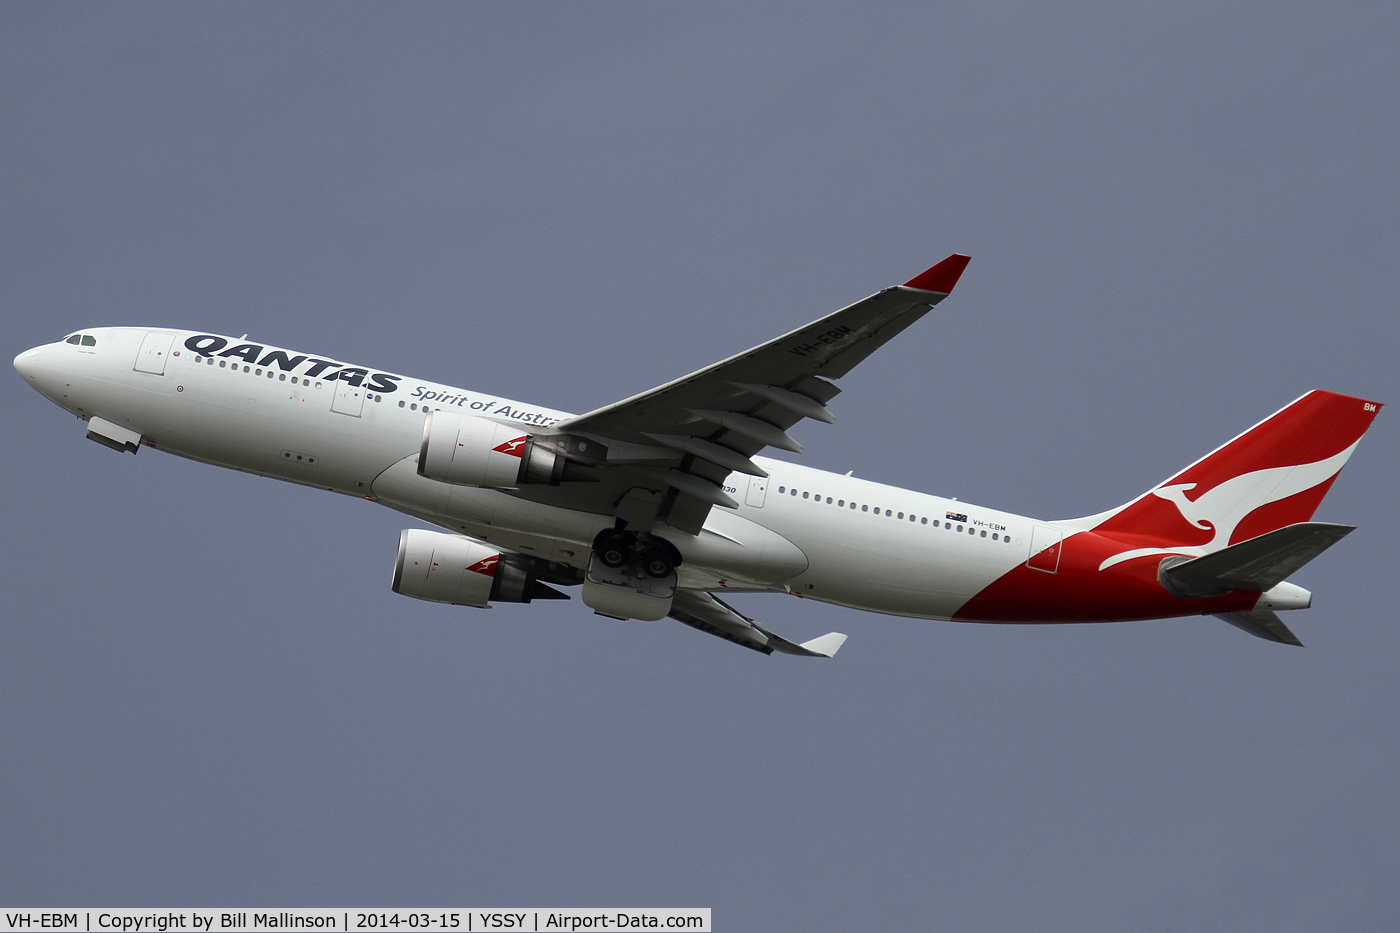 VH-EBM, 2009 Airbus A330-202 C/N 1061, away from 34L